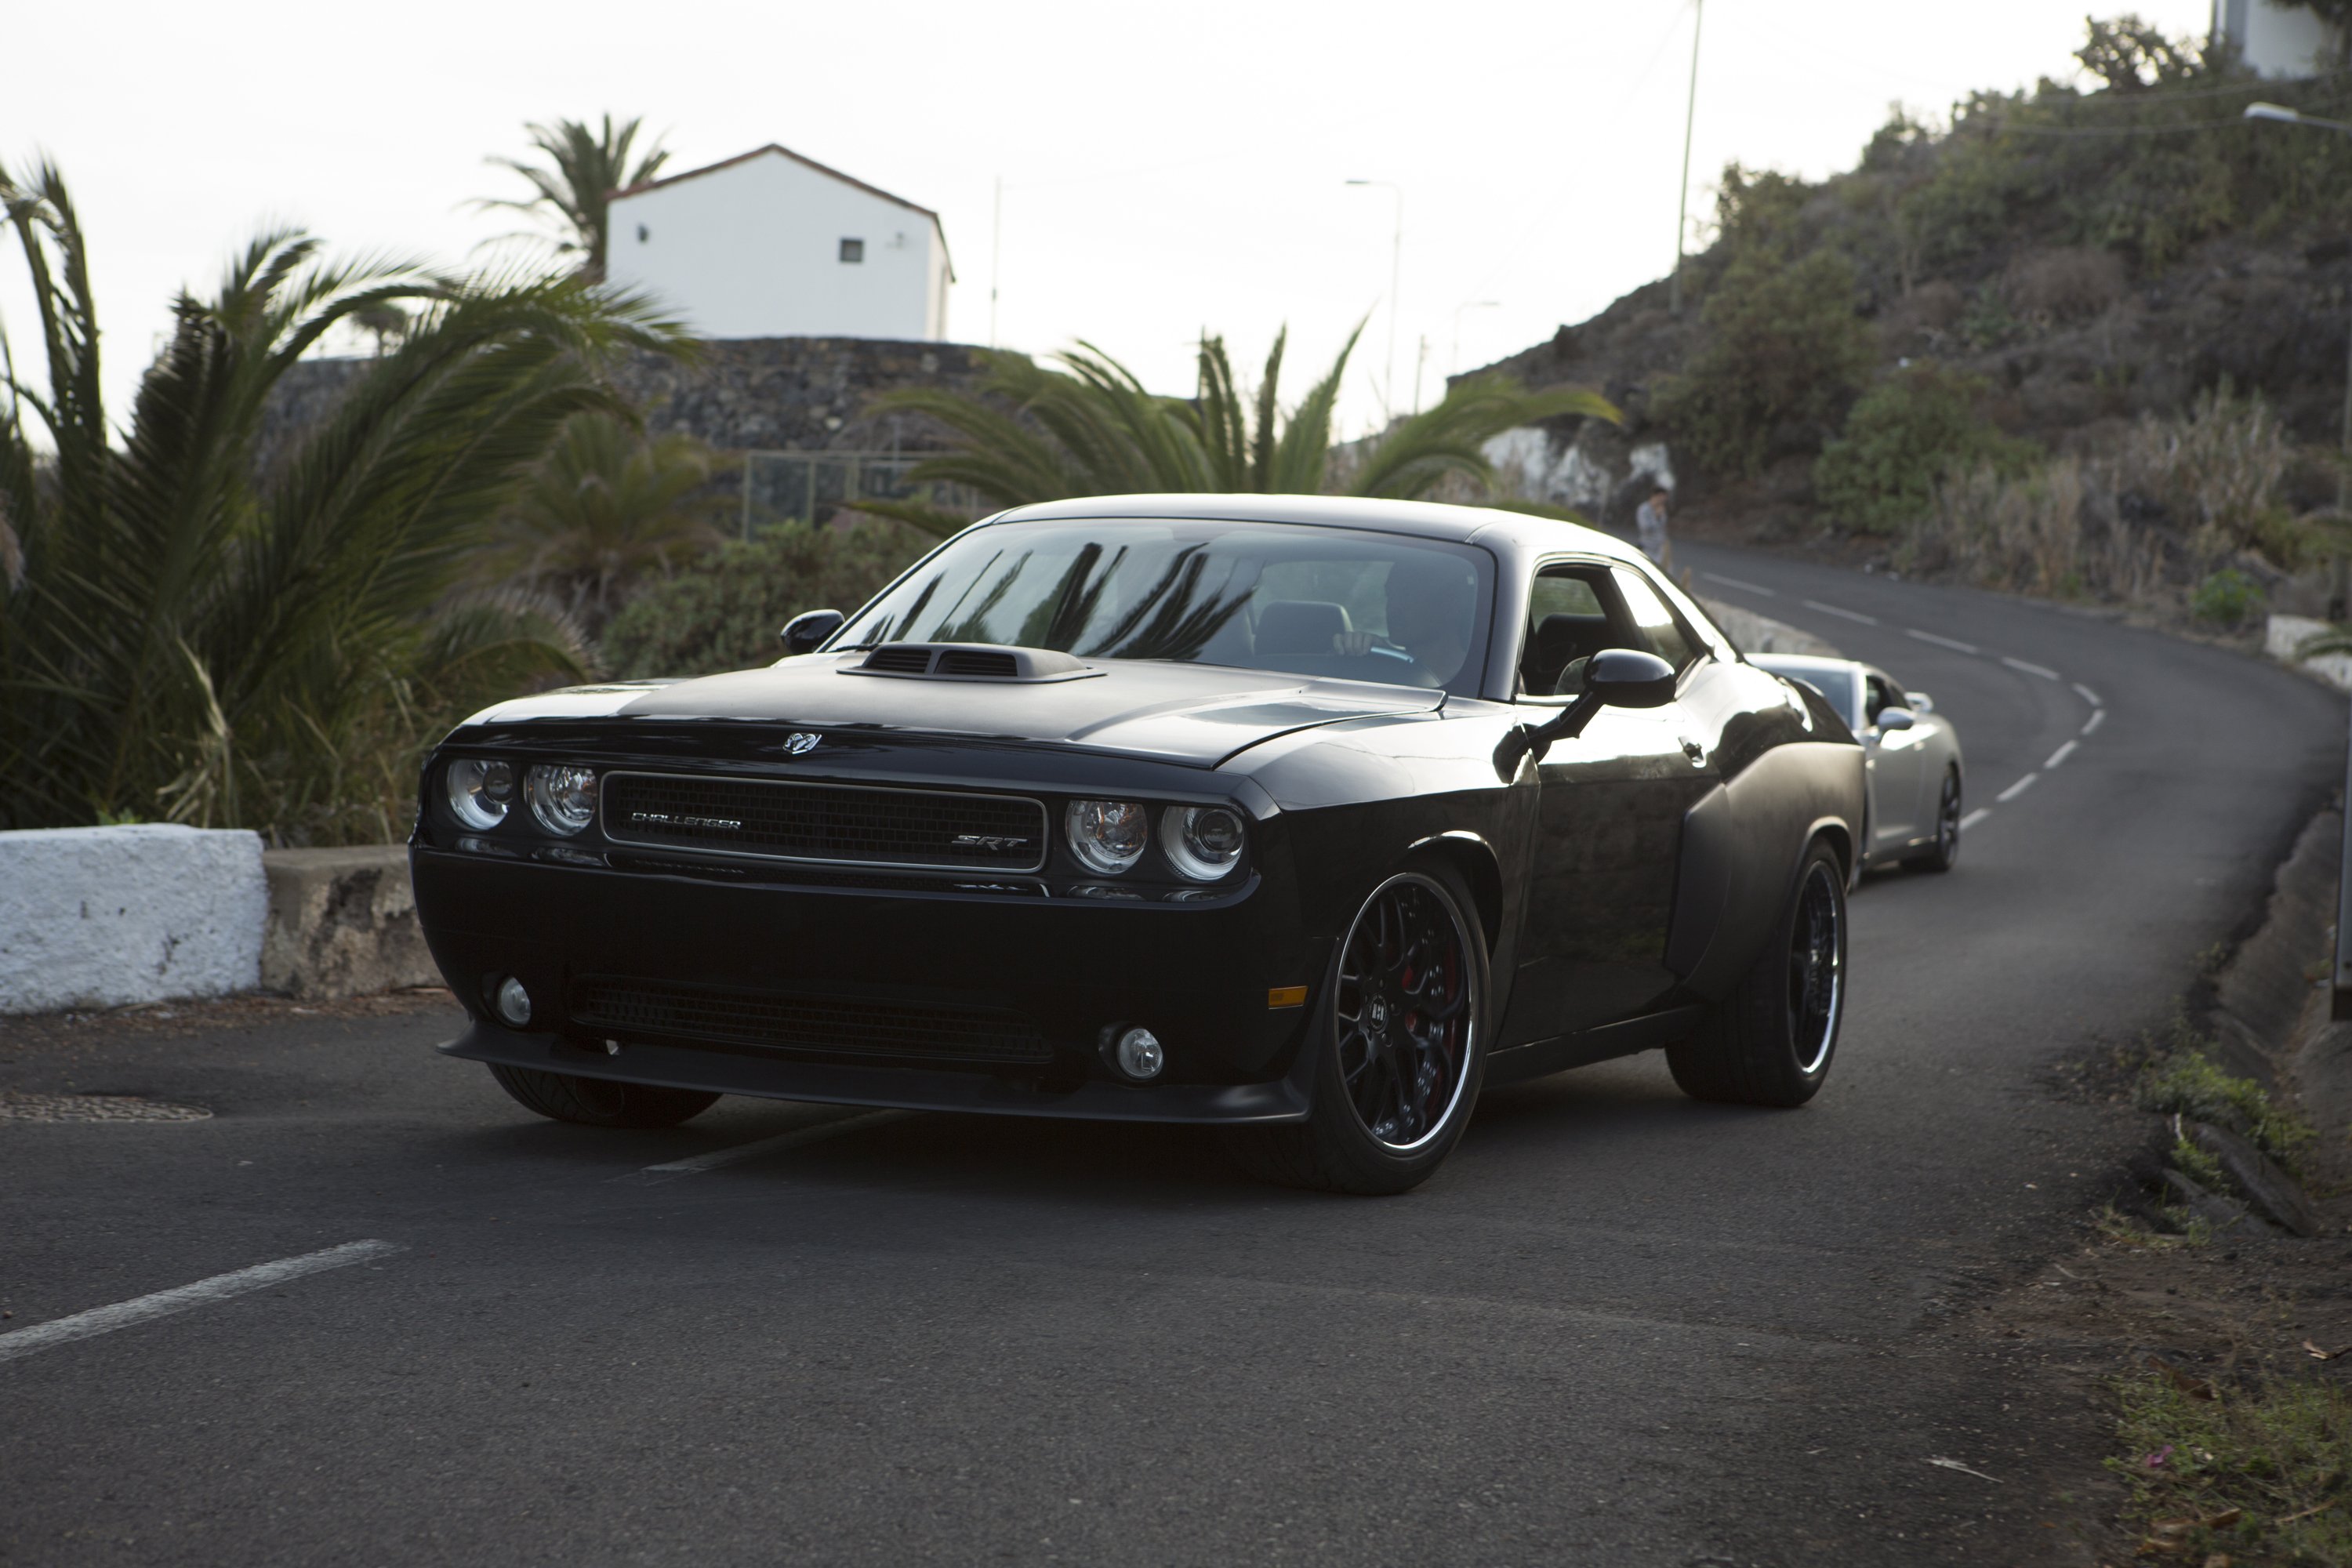 2012, Dodge, Challenger, Srt8, 392, Fast, Furious, Tuning, Hot, Rod, Rods, Muscle Wallpaper